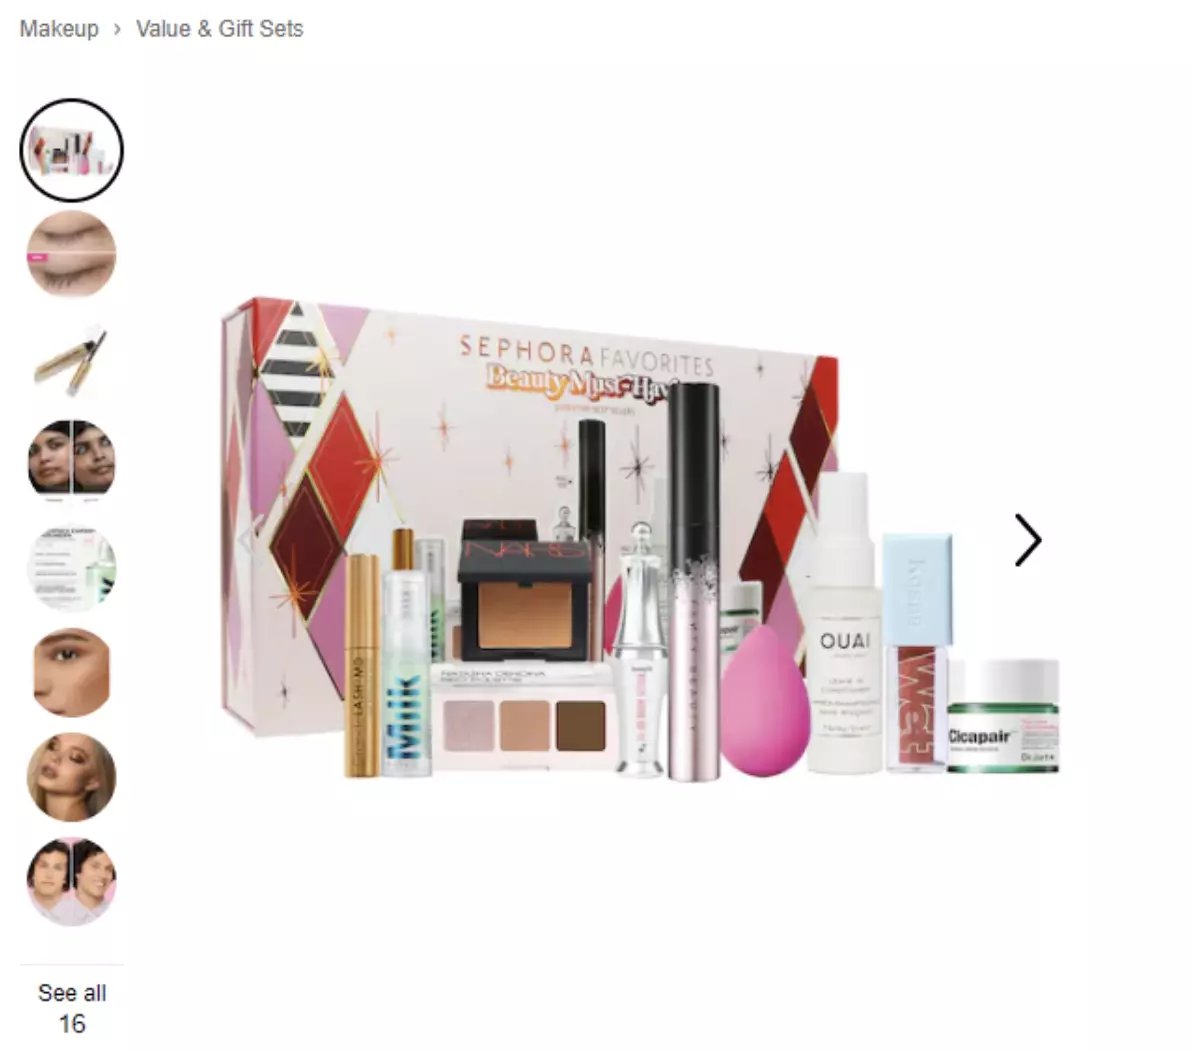 Sephora has bundled 16 beauty products together